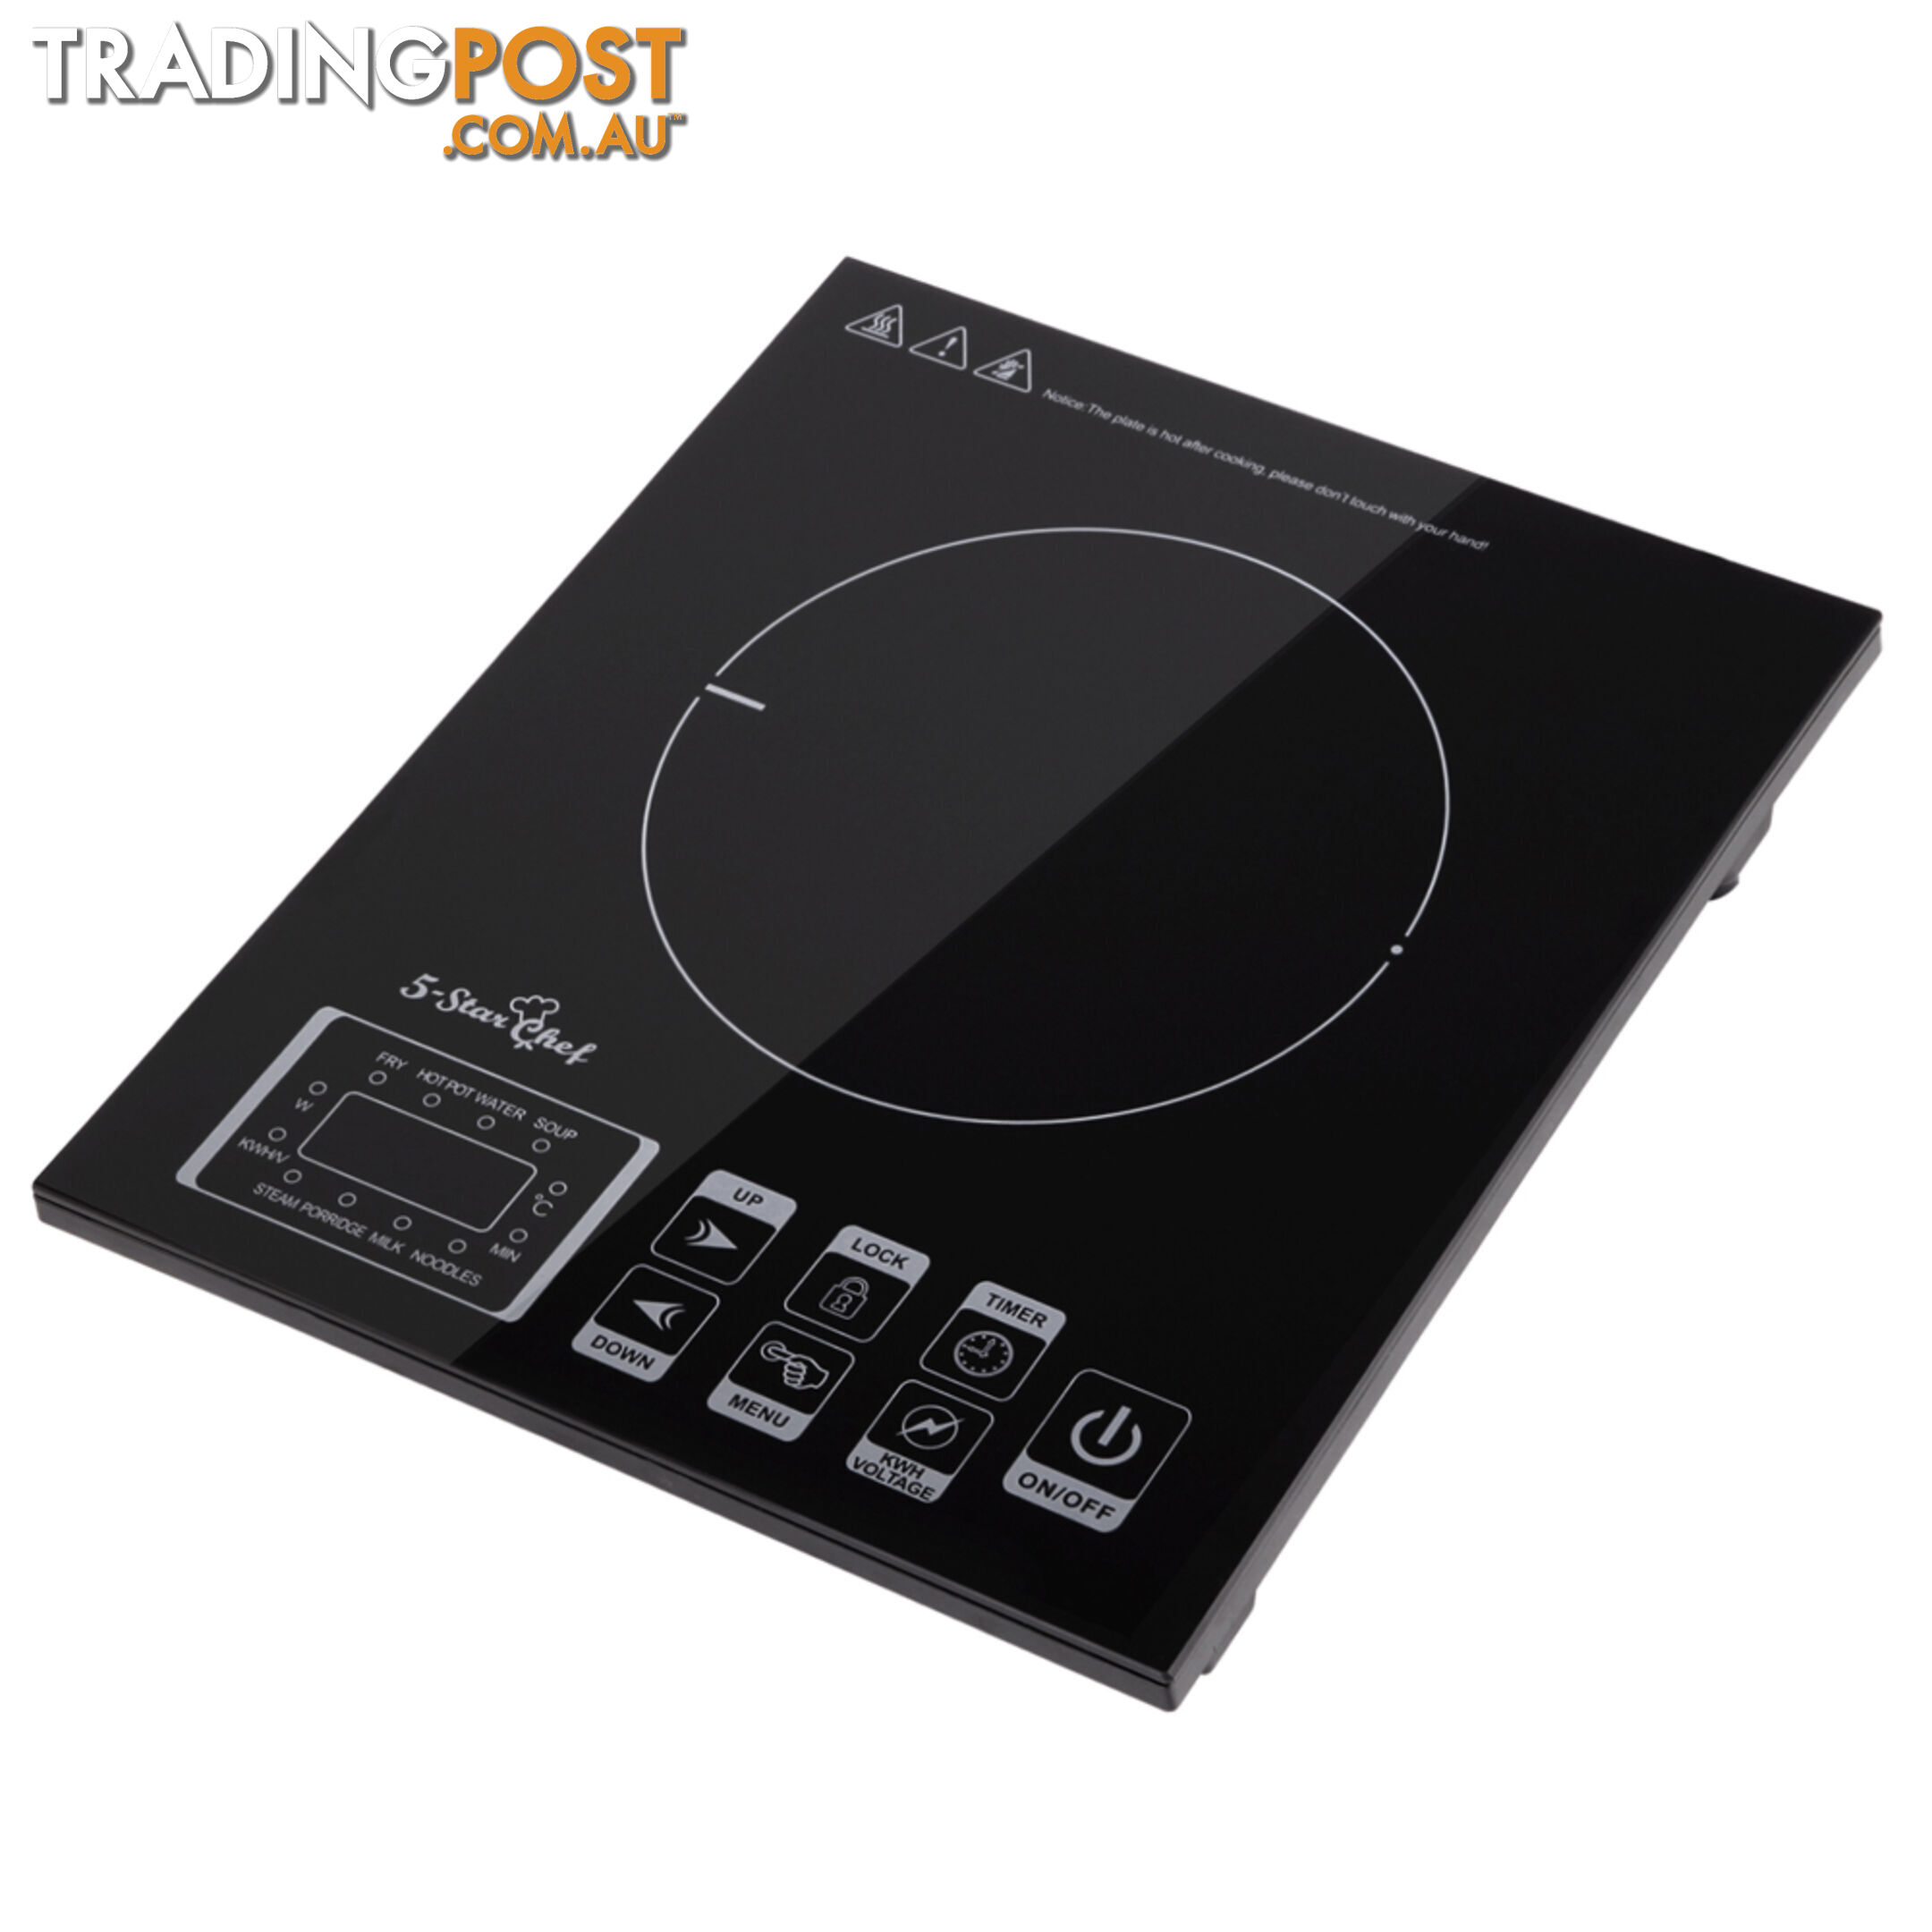 5 Star Chef Induction Cooktop w/ Digital Display Hotplate